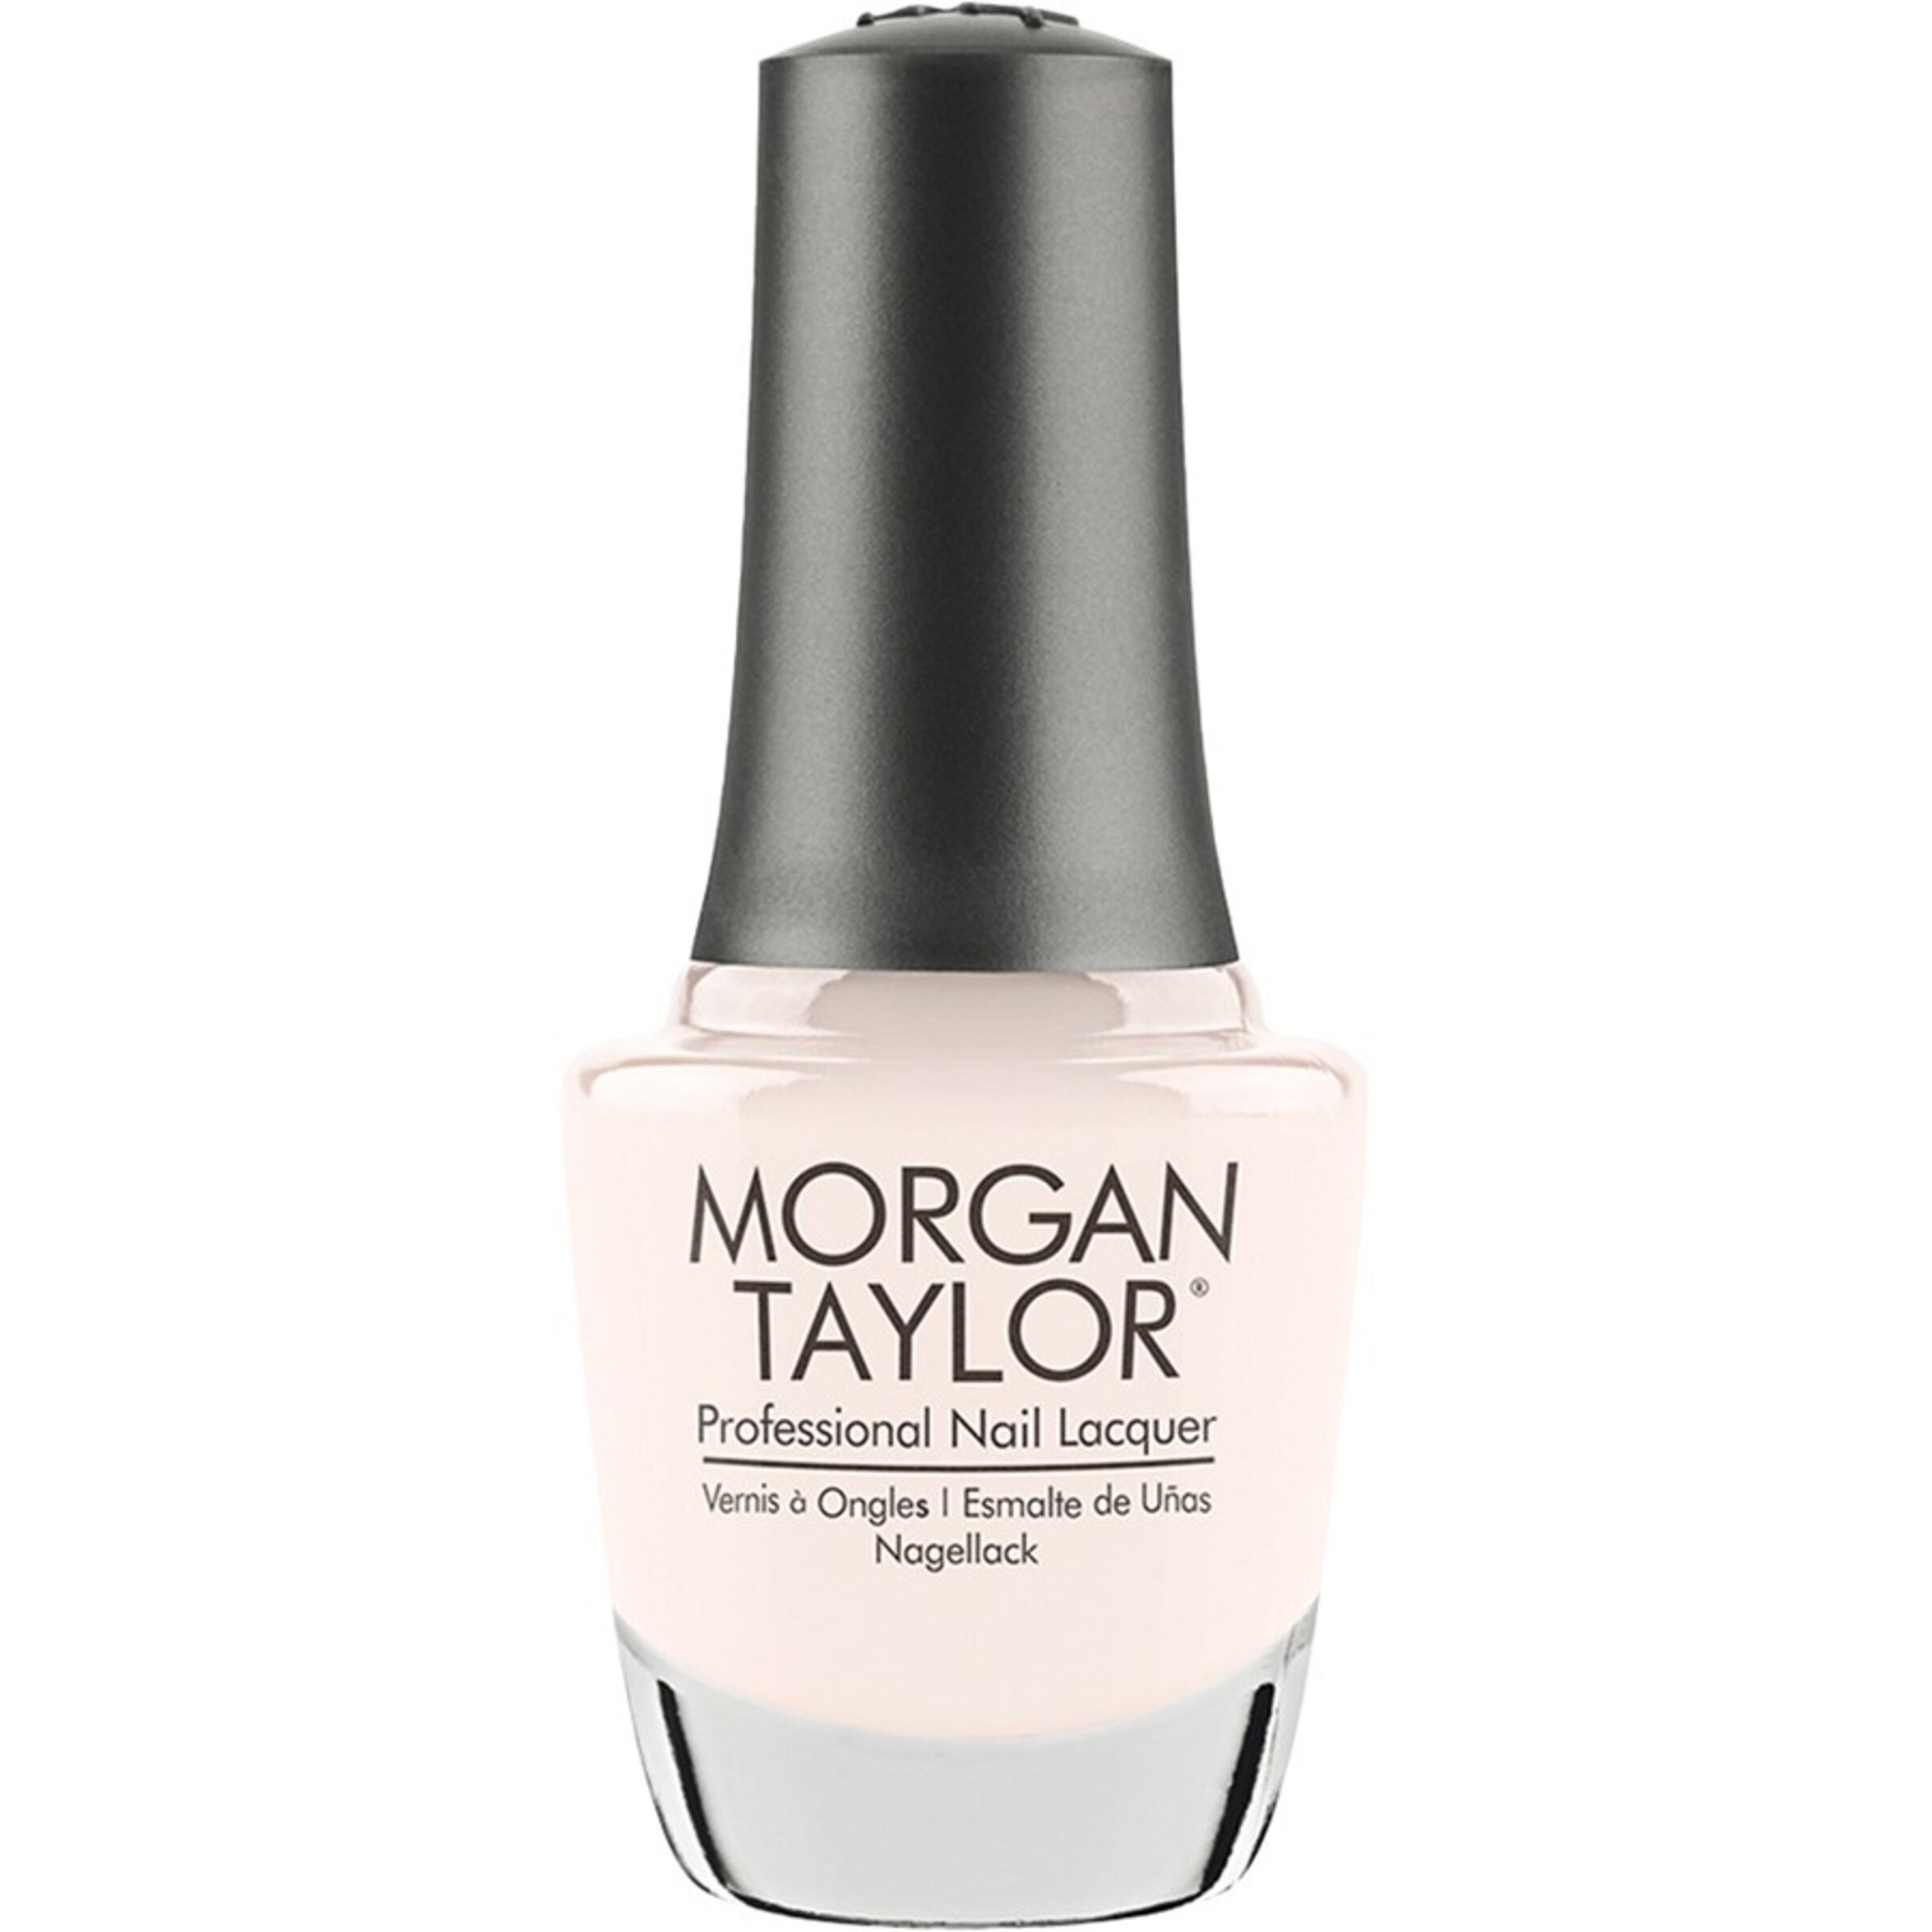 Morgan Taylor Nagellack White & Nude Collection in Beige 